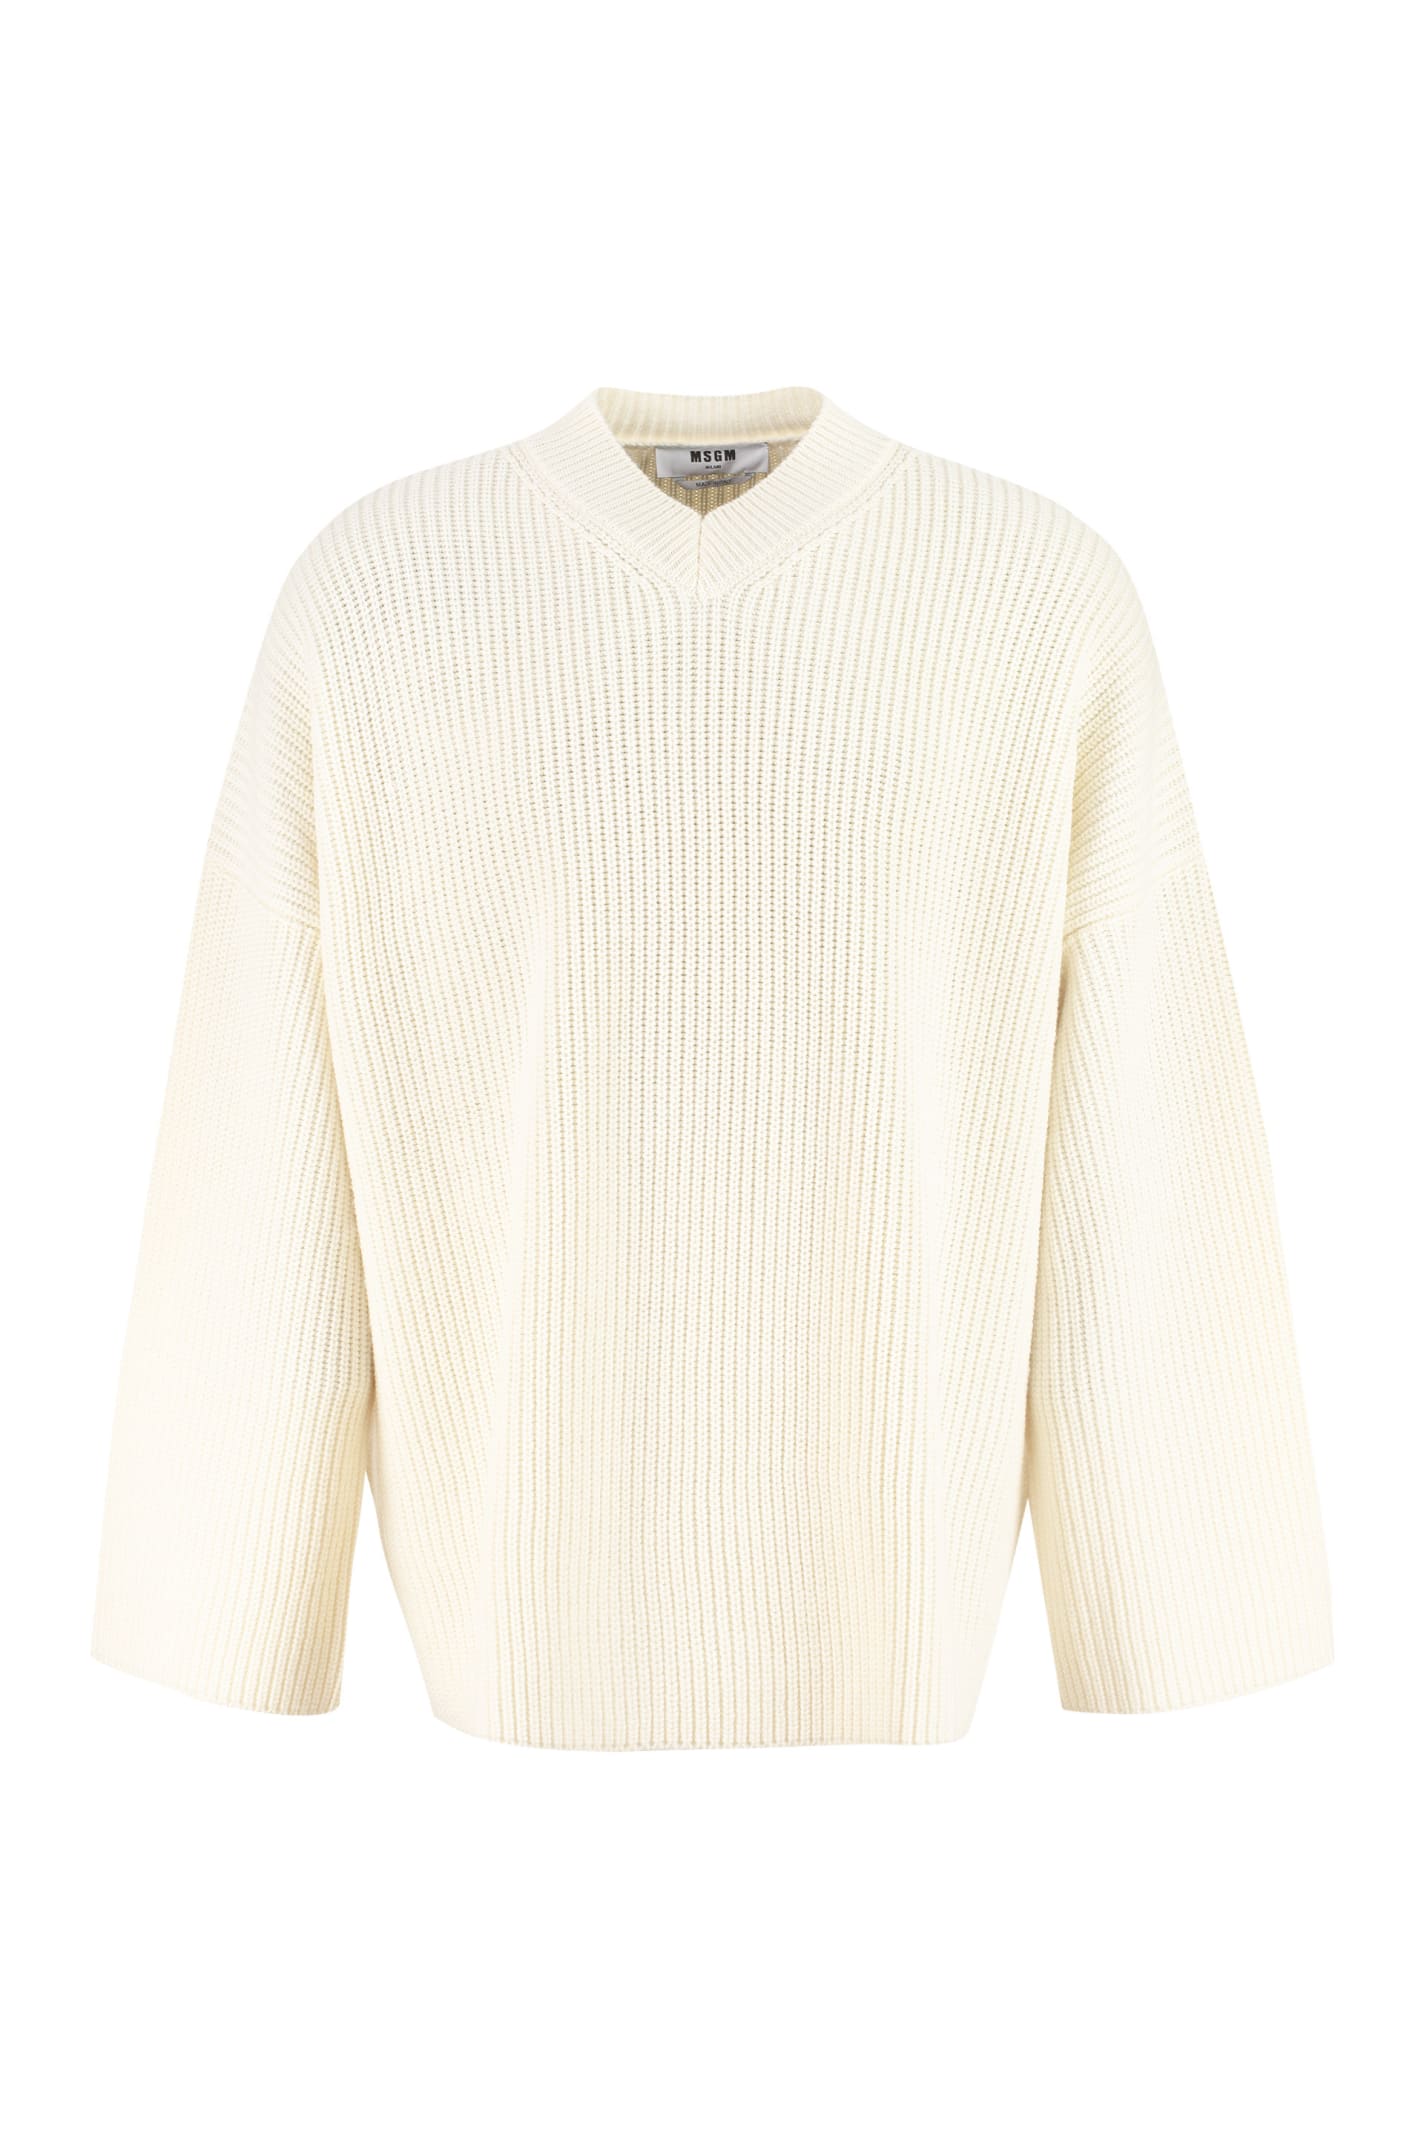 MSGM ribbed crew-neck pullover